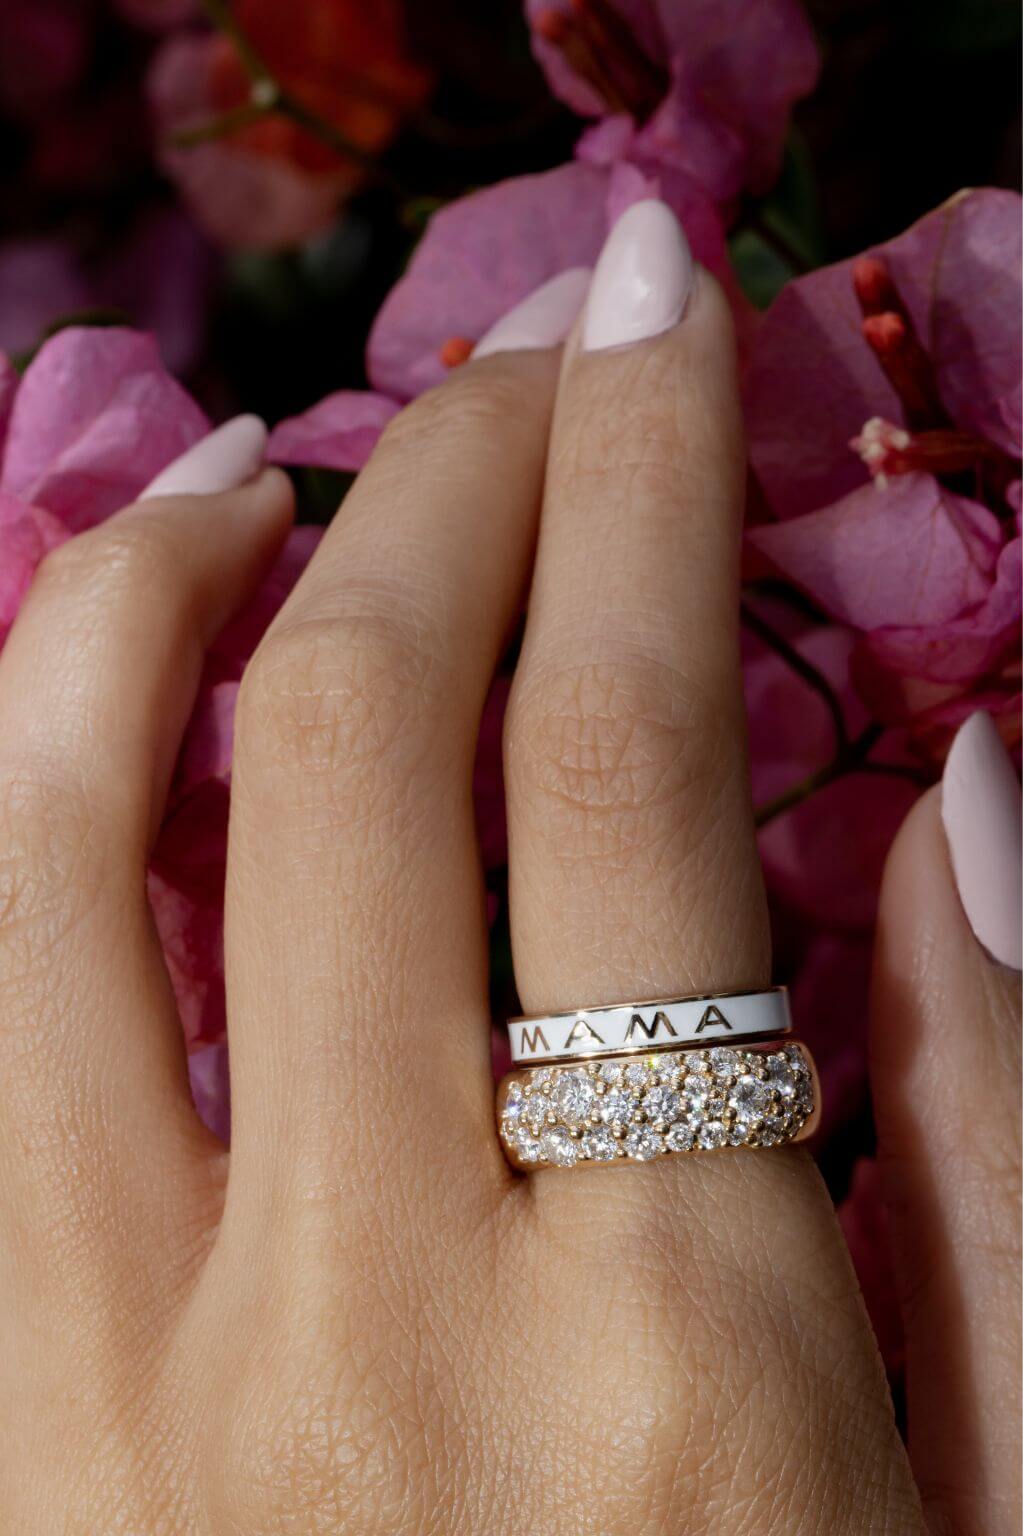 close up of woman's hand wearing our White Mama Enamel Band stacked with a white diamond chunky ring.